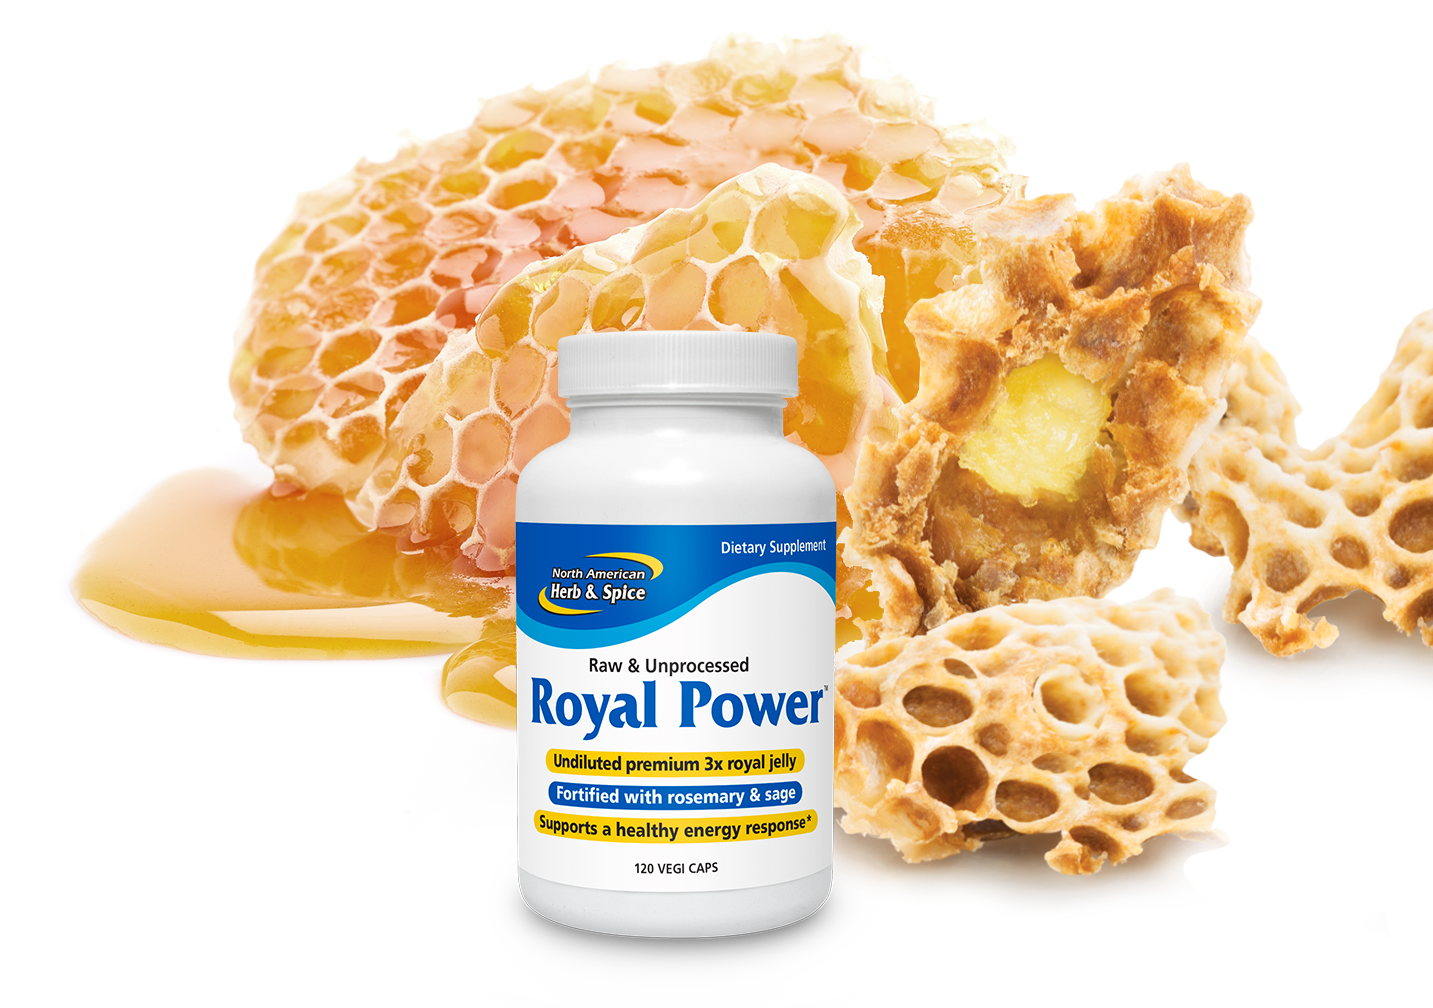 Royal Jelly ingredient with Royal Power product